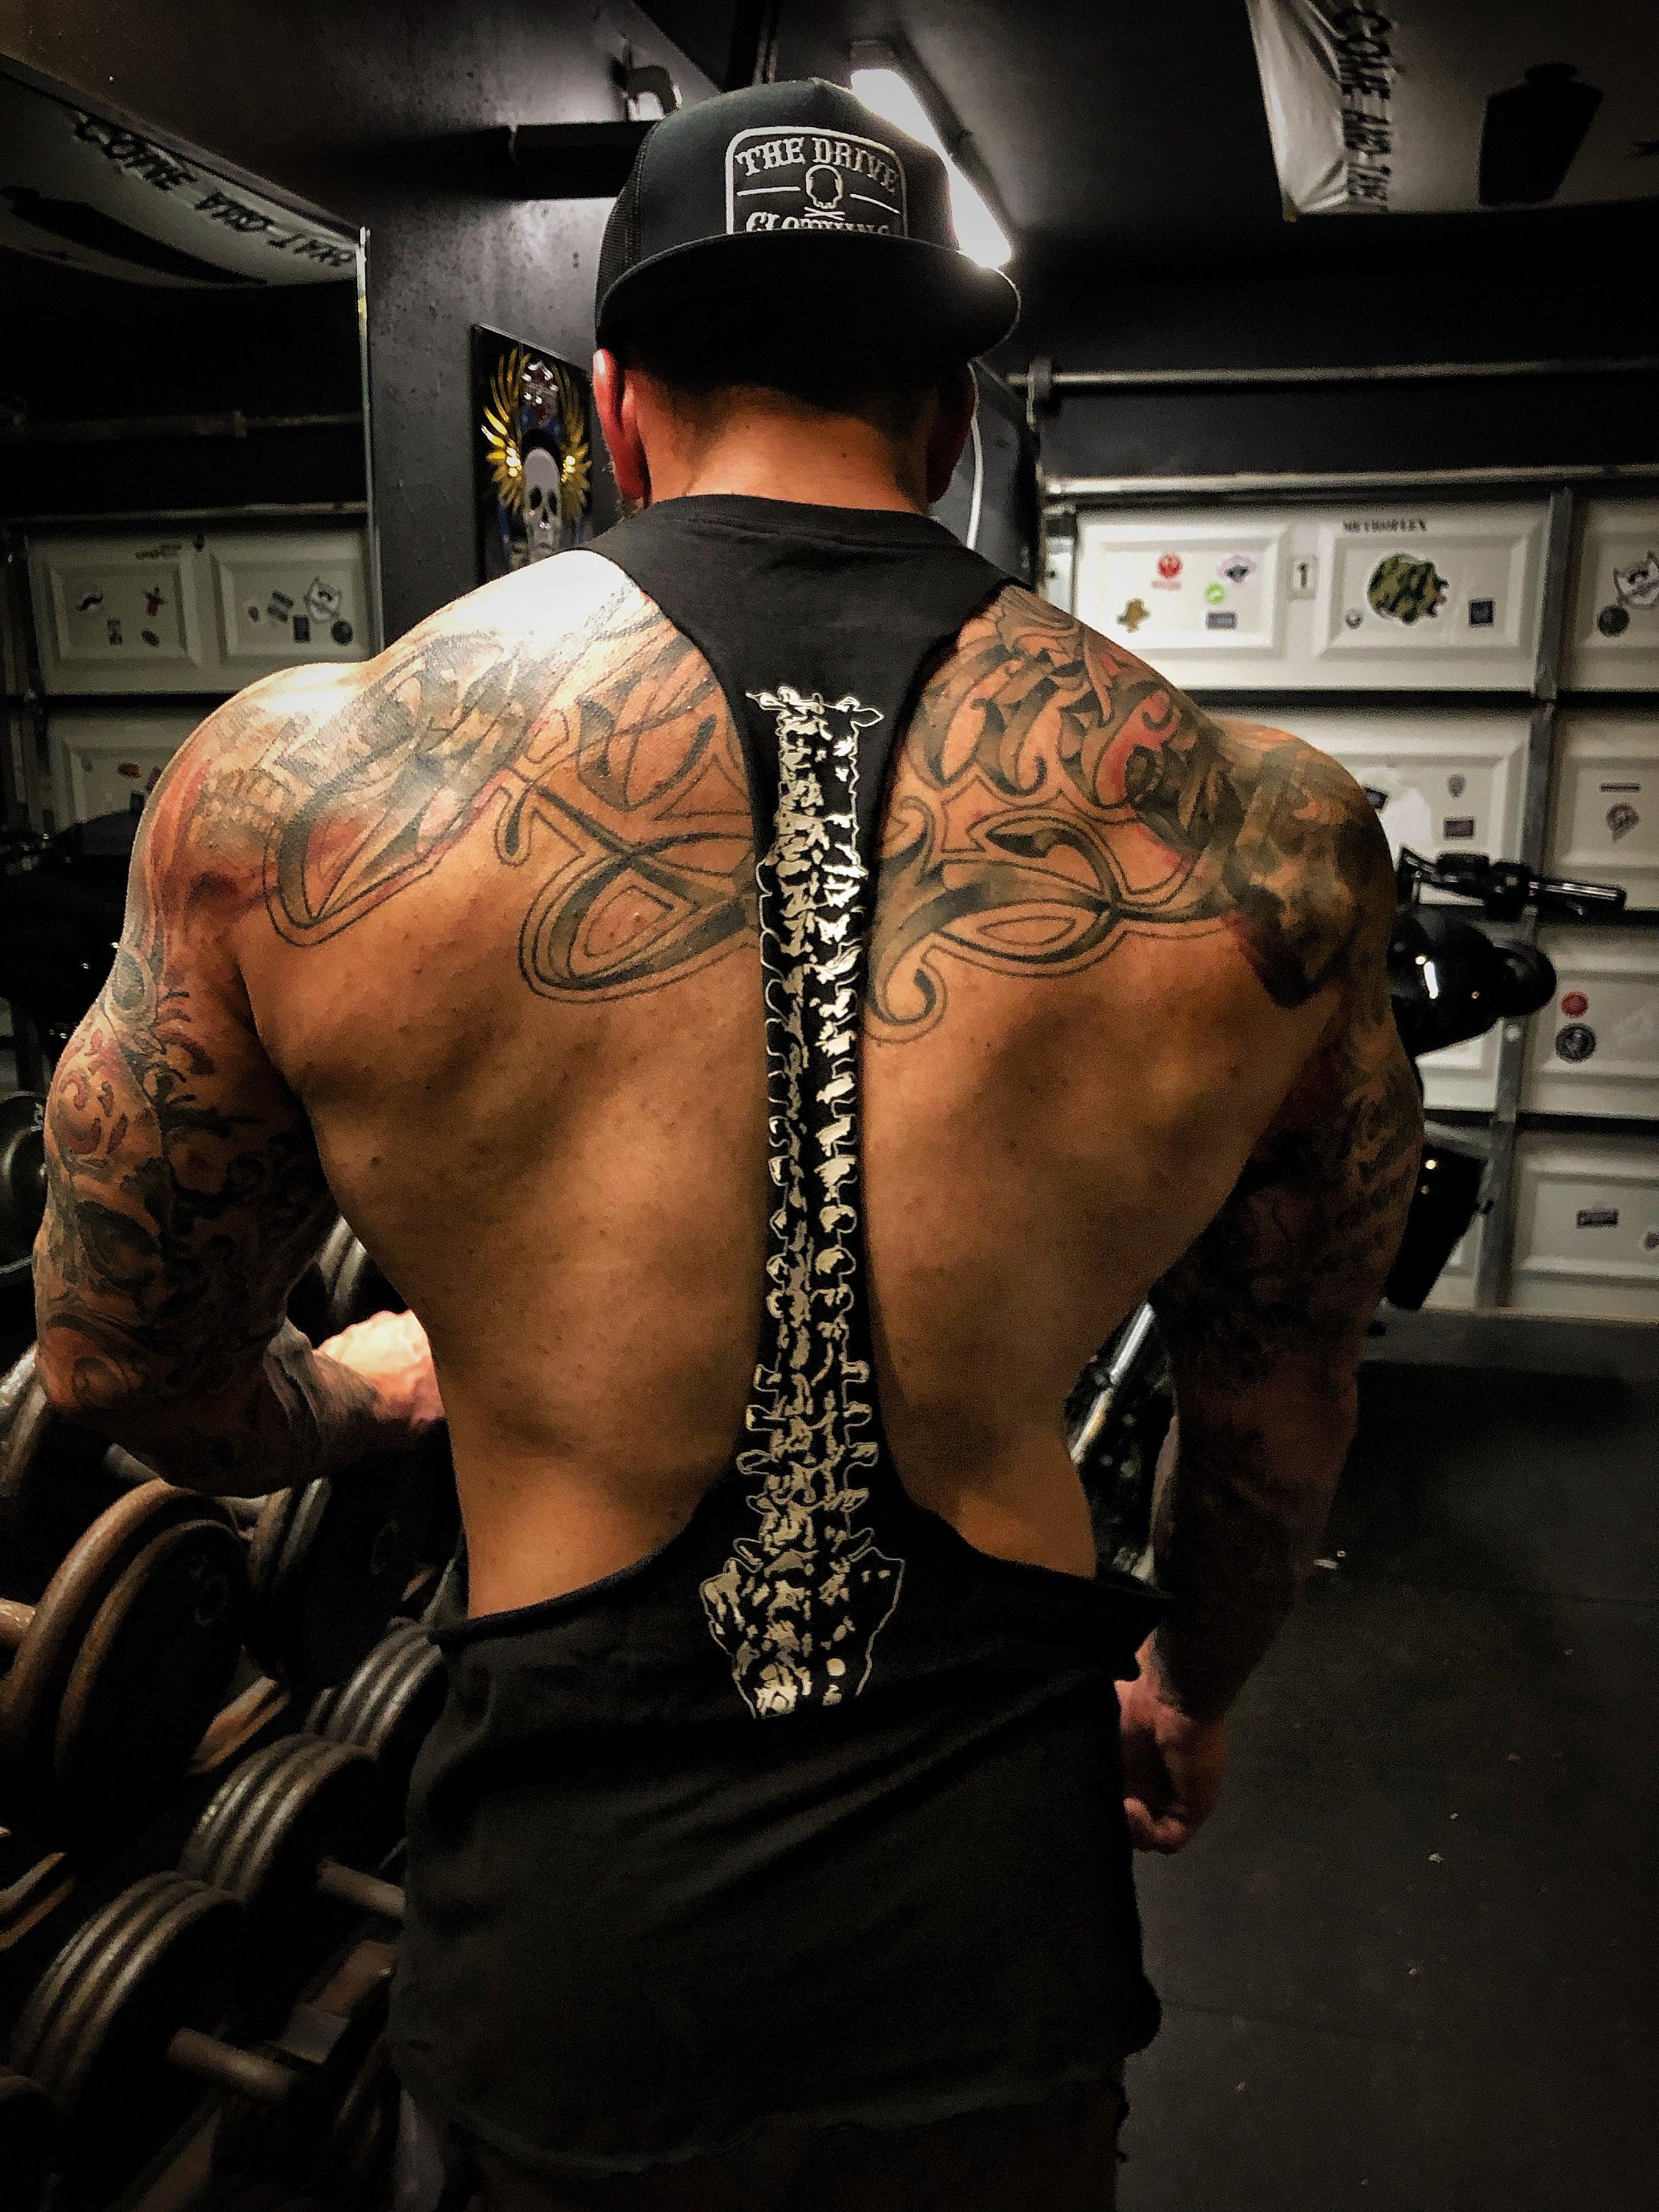 LOOK BACK STRINGER TANK TOP - The Drive Clothing